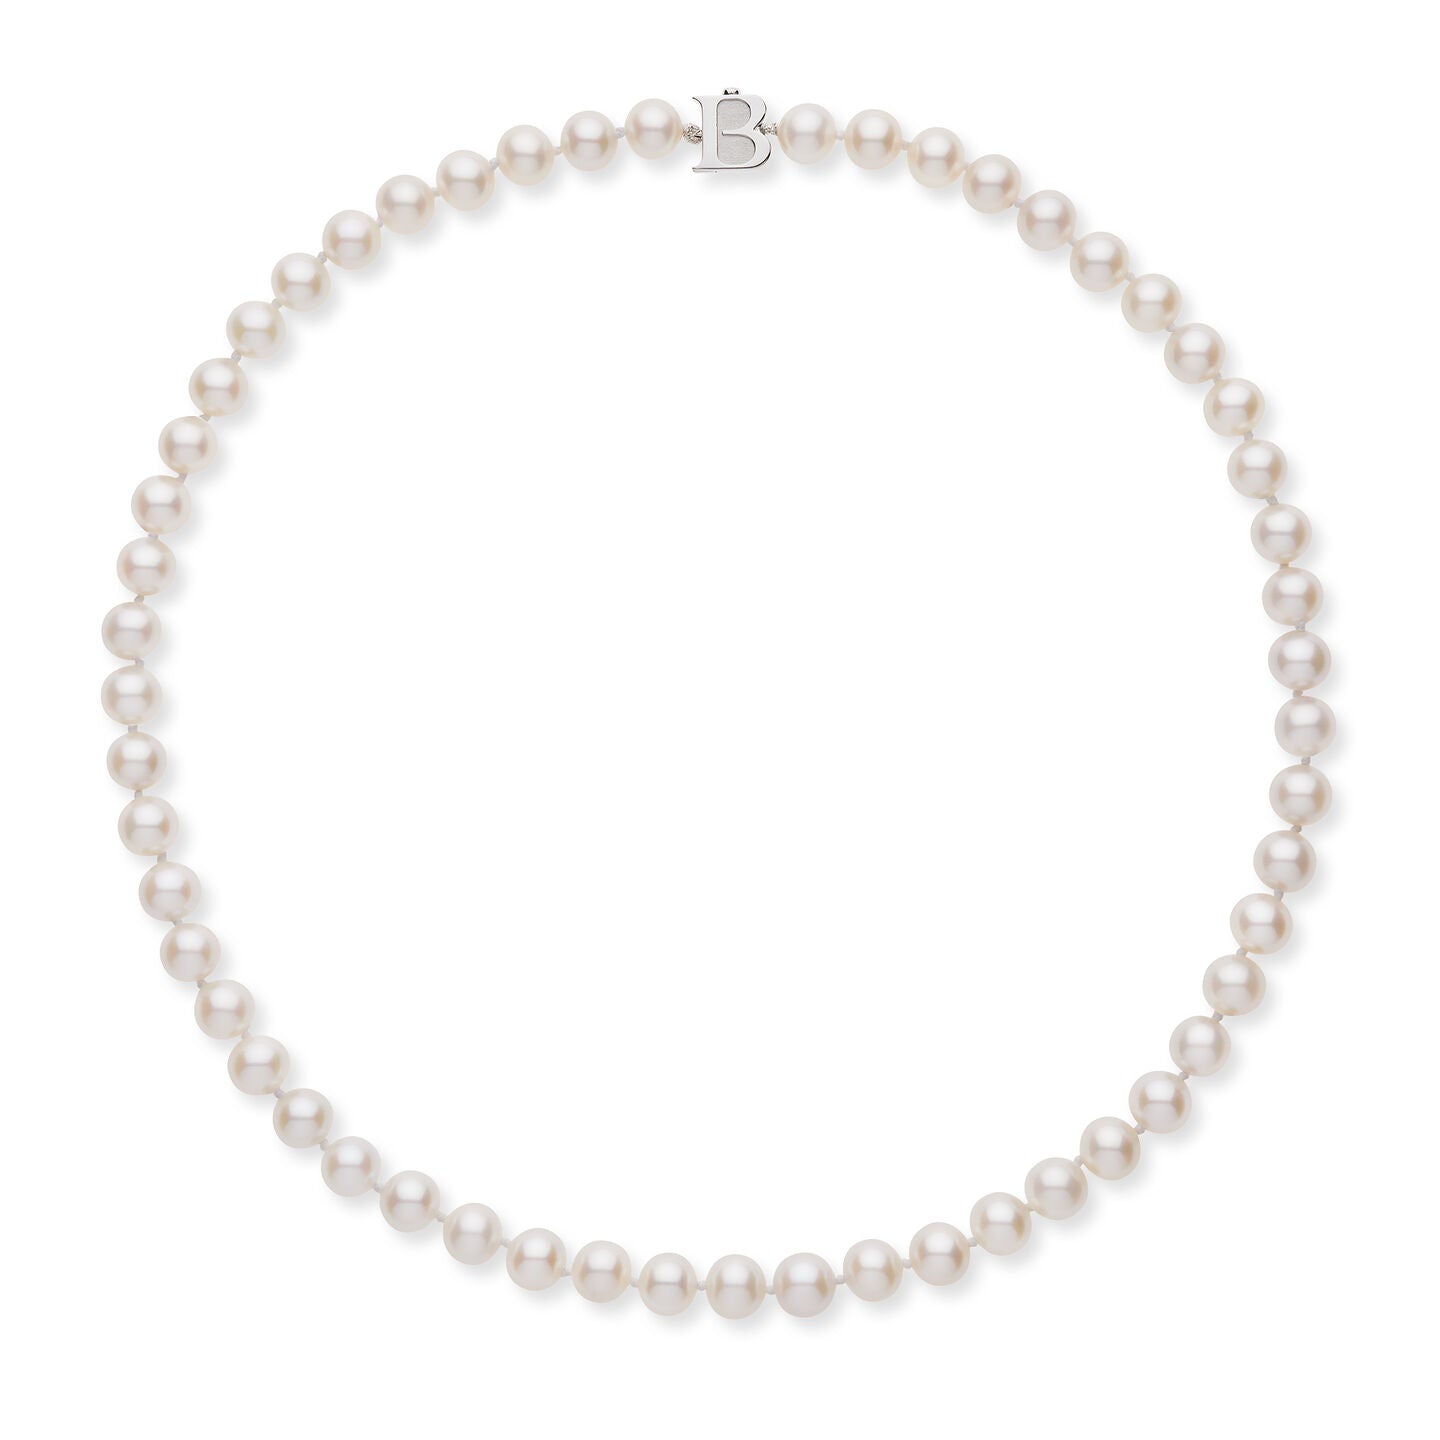 Birks Pearls 7.5-8 mm Cultured Freshwater Pearl Necklace in Sterling Silver 450017311239